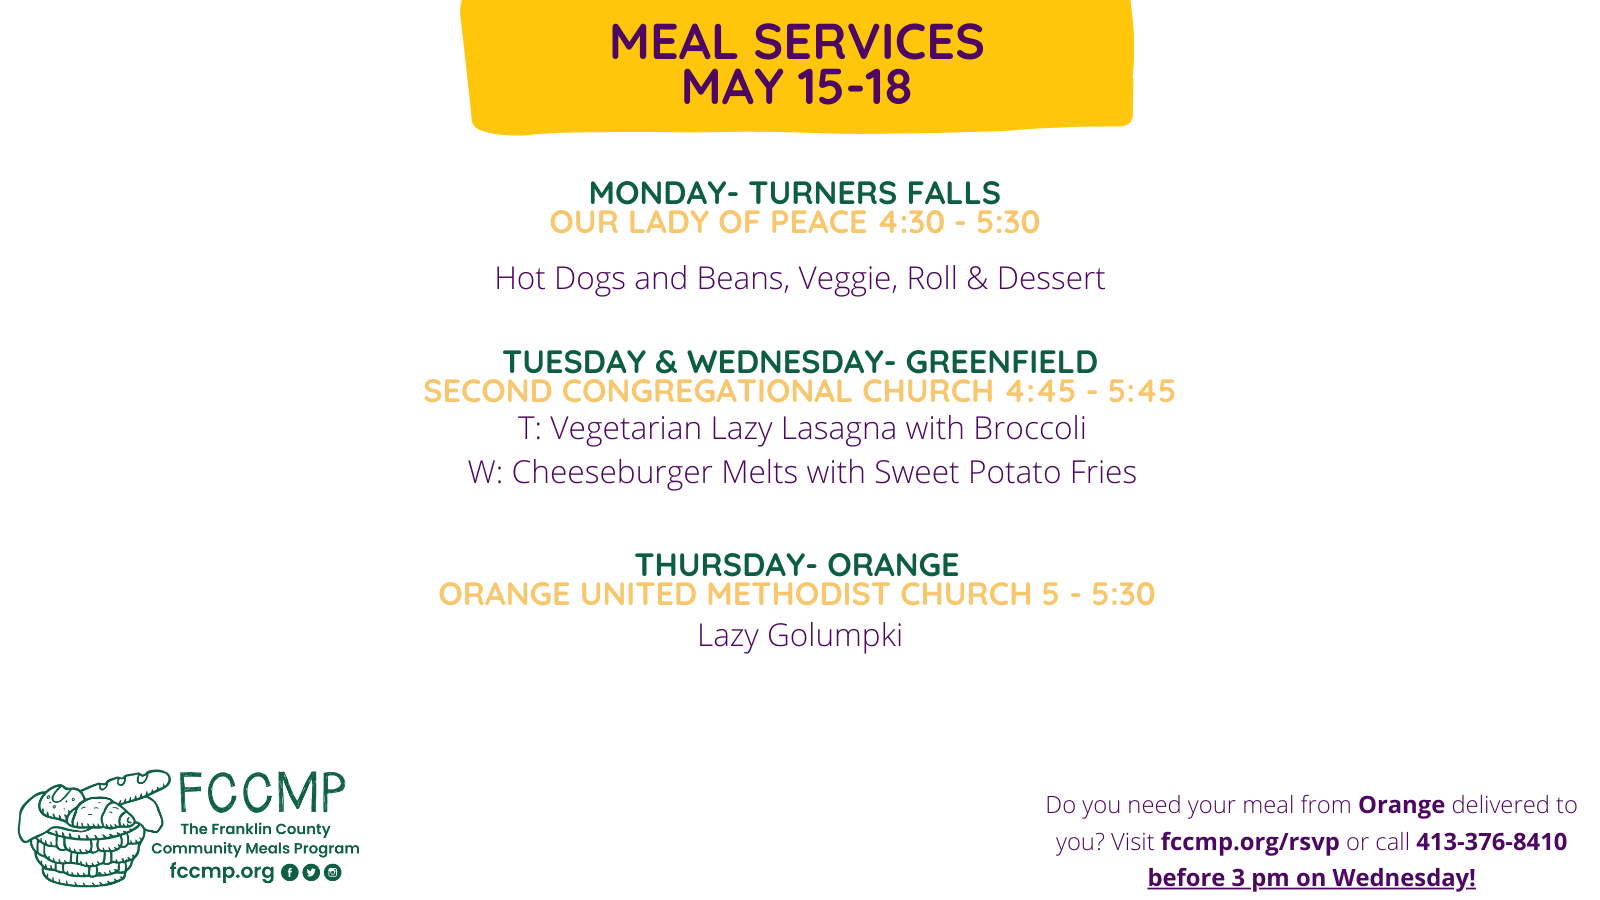 Meal Services May 15-18: Monday at Our Lady of Peace Church in Turners Falls, 4:30-5:30: Hot Dogs and Beans, Veggie, Roll & Dessert Tuesday and Wednesday at Second Congregational Church in Greenfield, 4:45-5:45: T: Vegetarian Lazy Lasagna with Broccoli W: Cheeseburger Melts with Sweet Potato Fries Thursday, Orange United Methodist Church, 5-5:30: Lazy Golumpki Do you need your meal from Orange or delivered to you? Visit fccmp.org/rsvp or call 413-376-8410 before 3 pm this Wednesday!